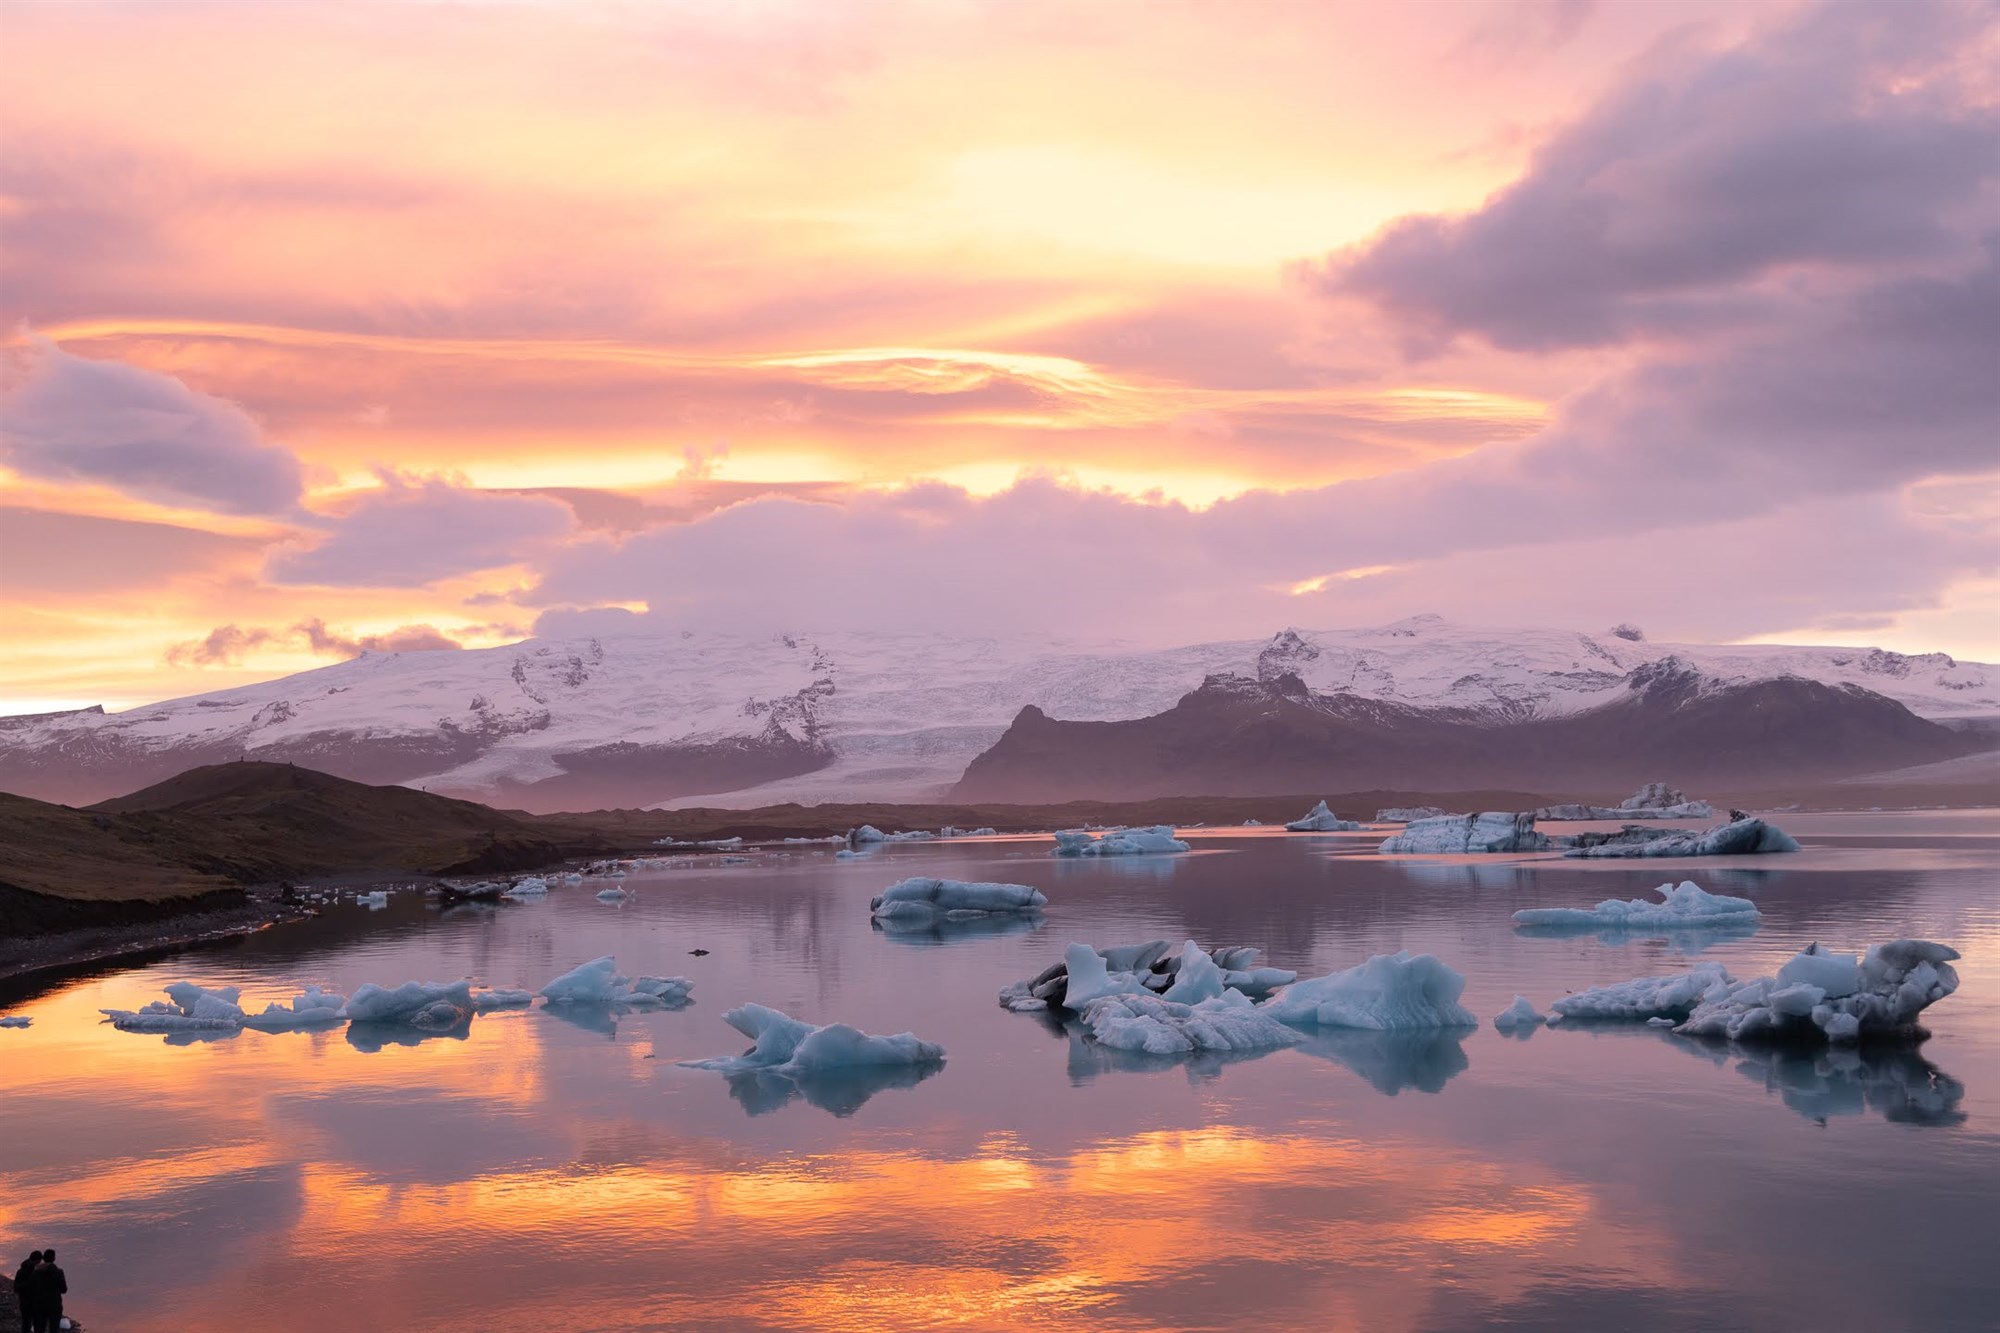 Jokulsarlon is a glacier lagoon located in the South-East of Iceland